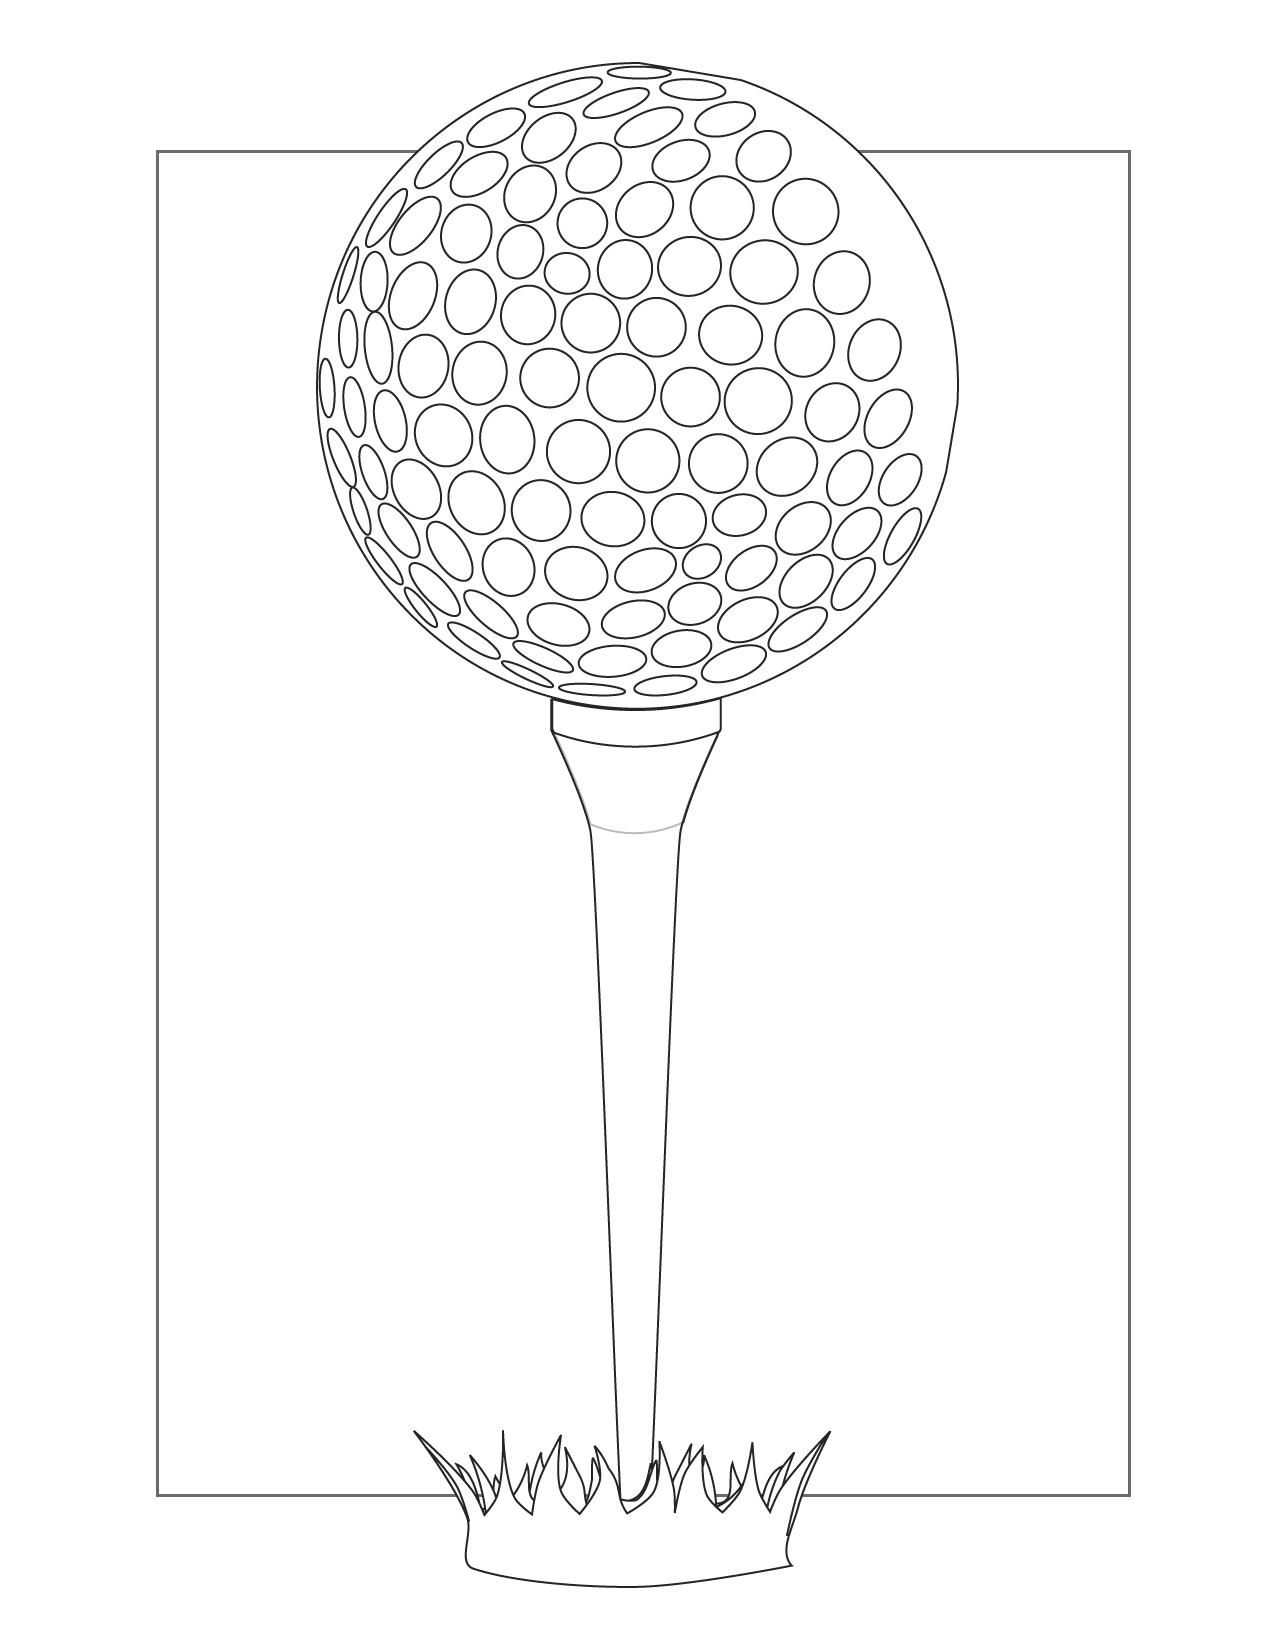 Golf Ball On A Tee Coloring Page